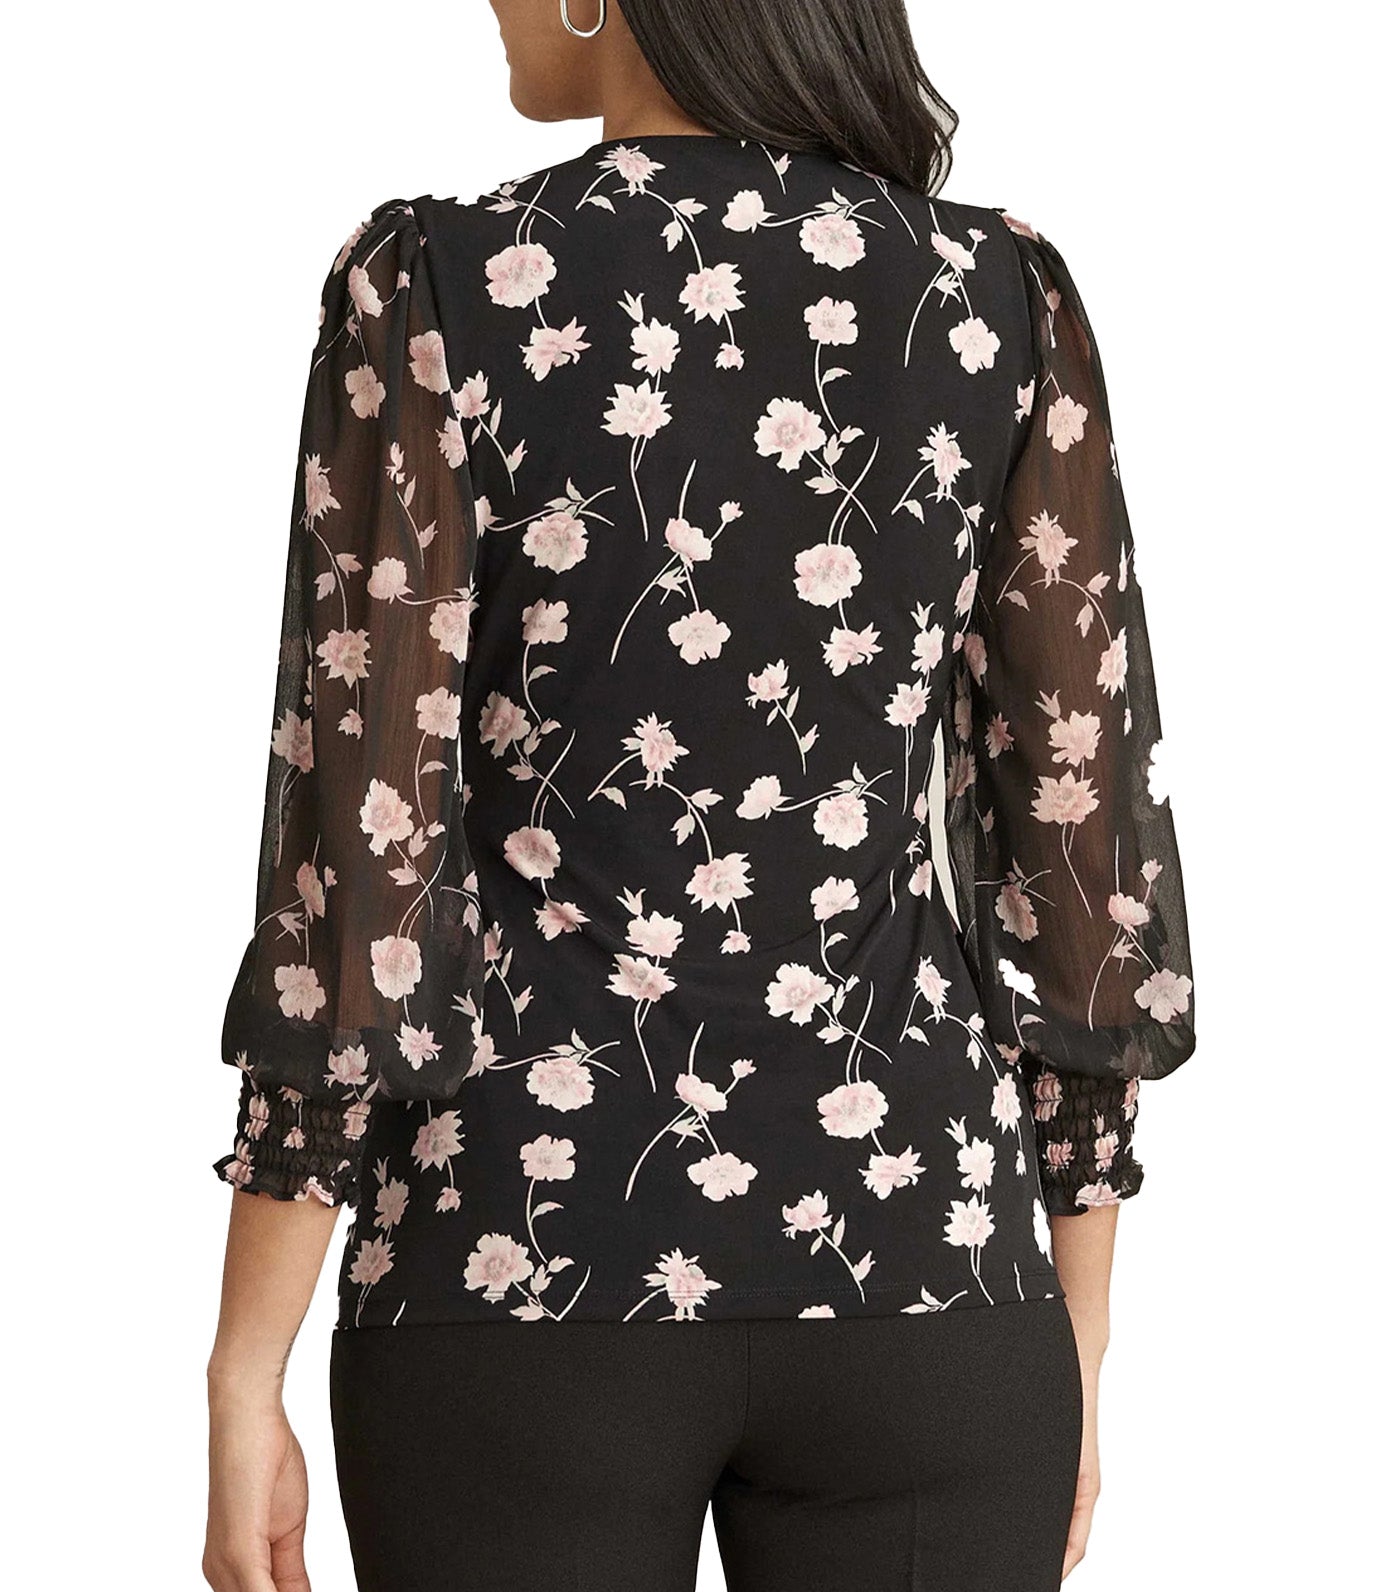 Printed Wrap Top with Sheer Sleeves Anne Black/Cherry Blossom Multi